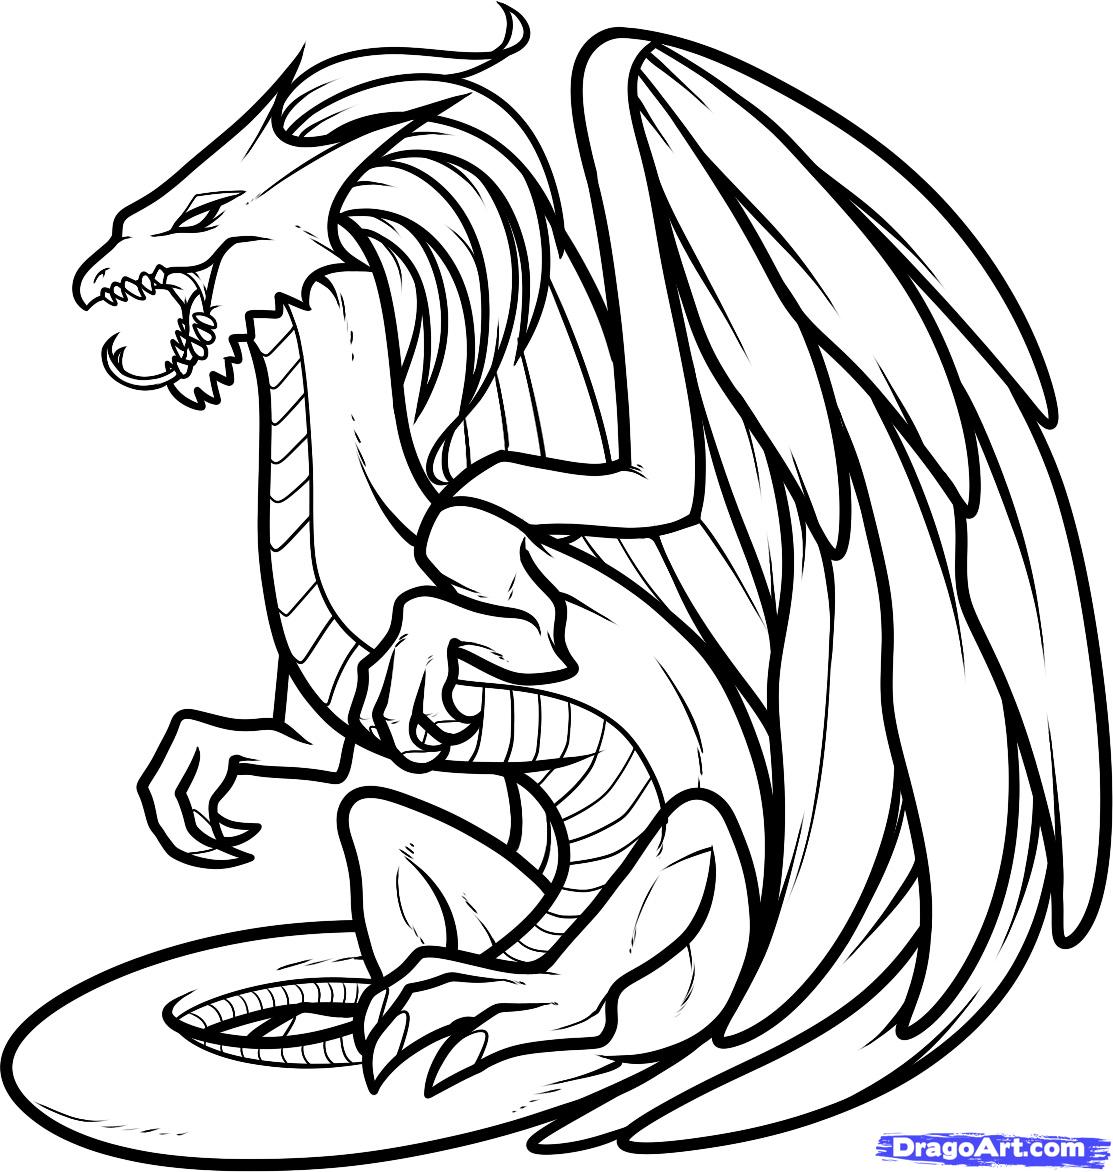 Dragon Drawings Black And White | Free download on ClipArtMag